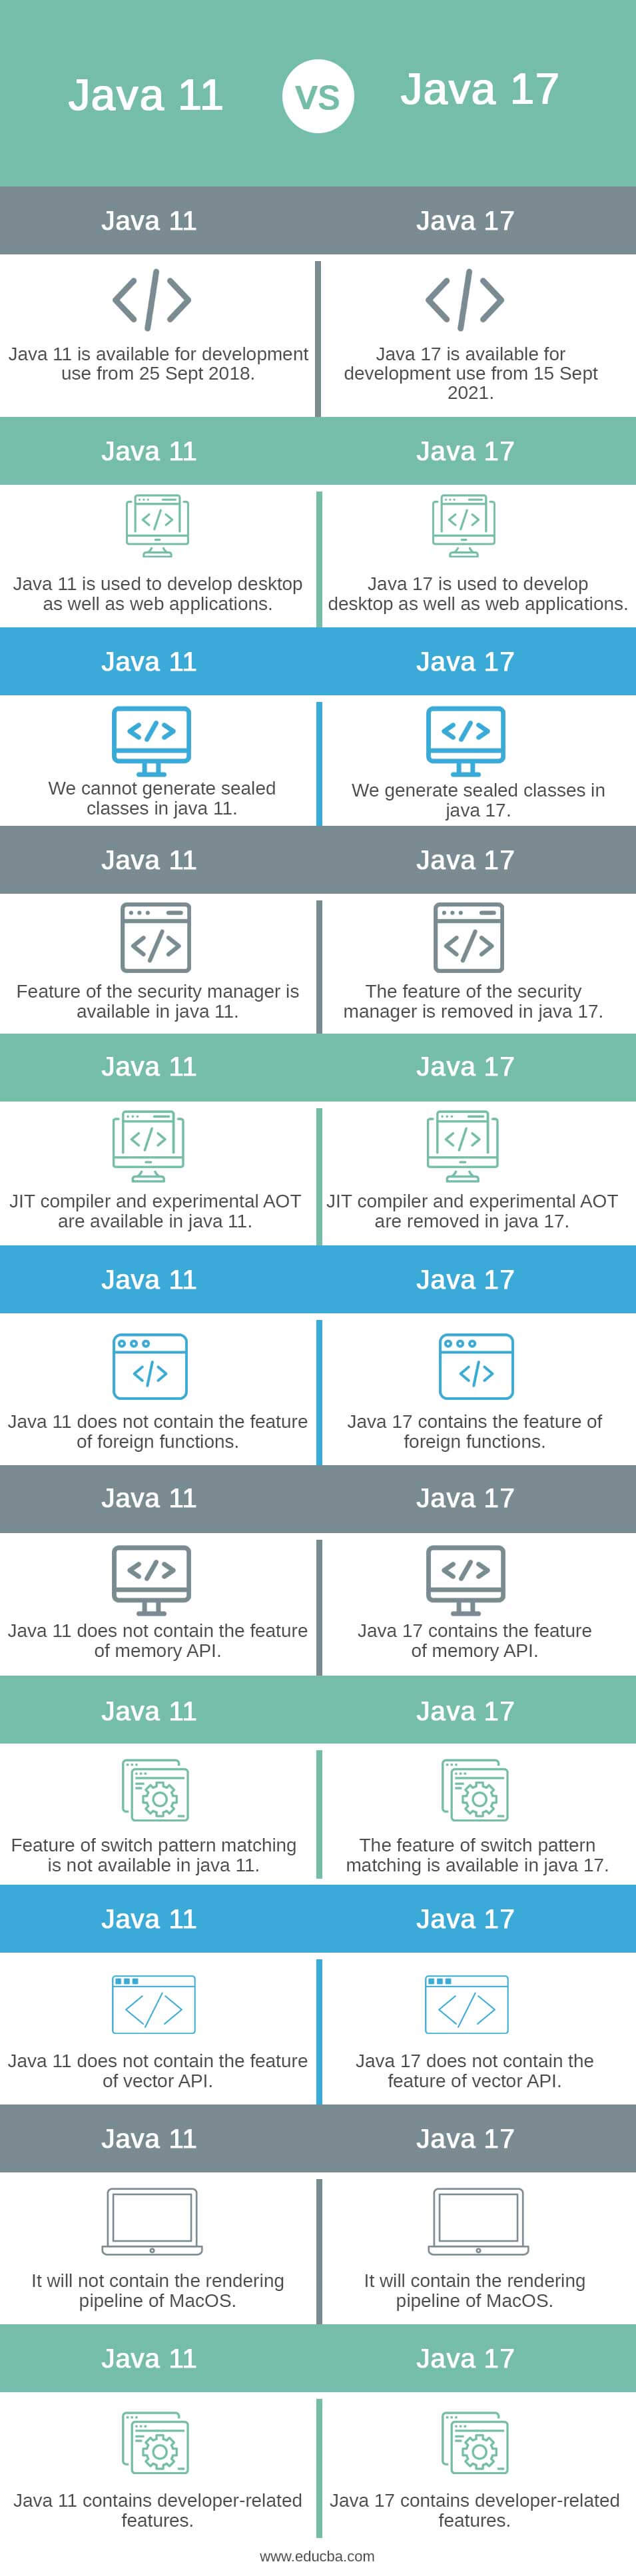 Should I learn Java 11 or 17?